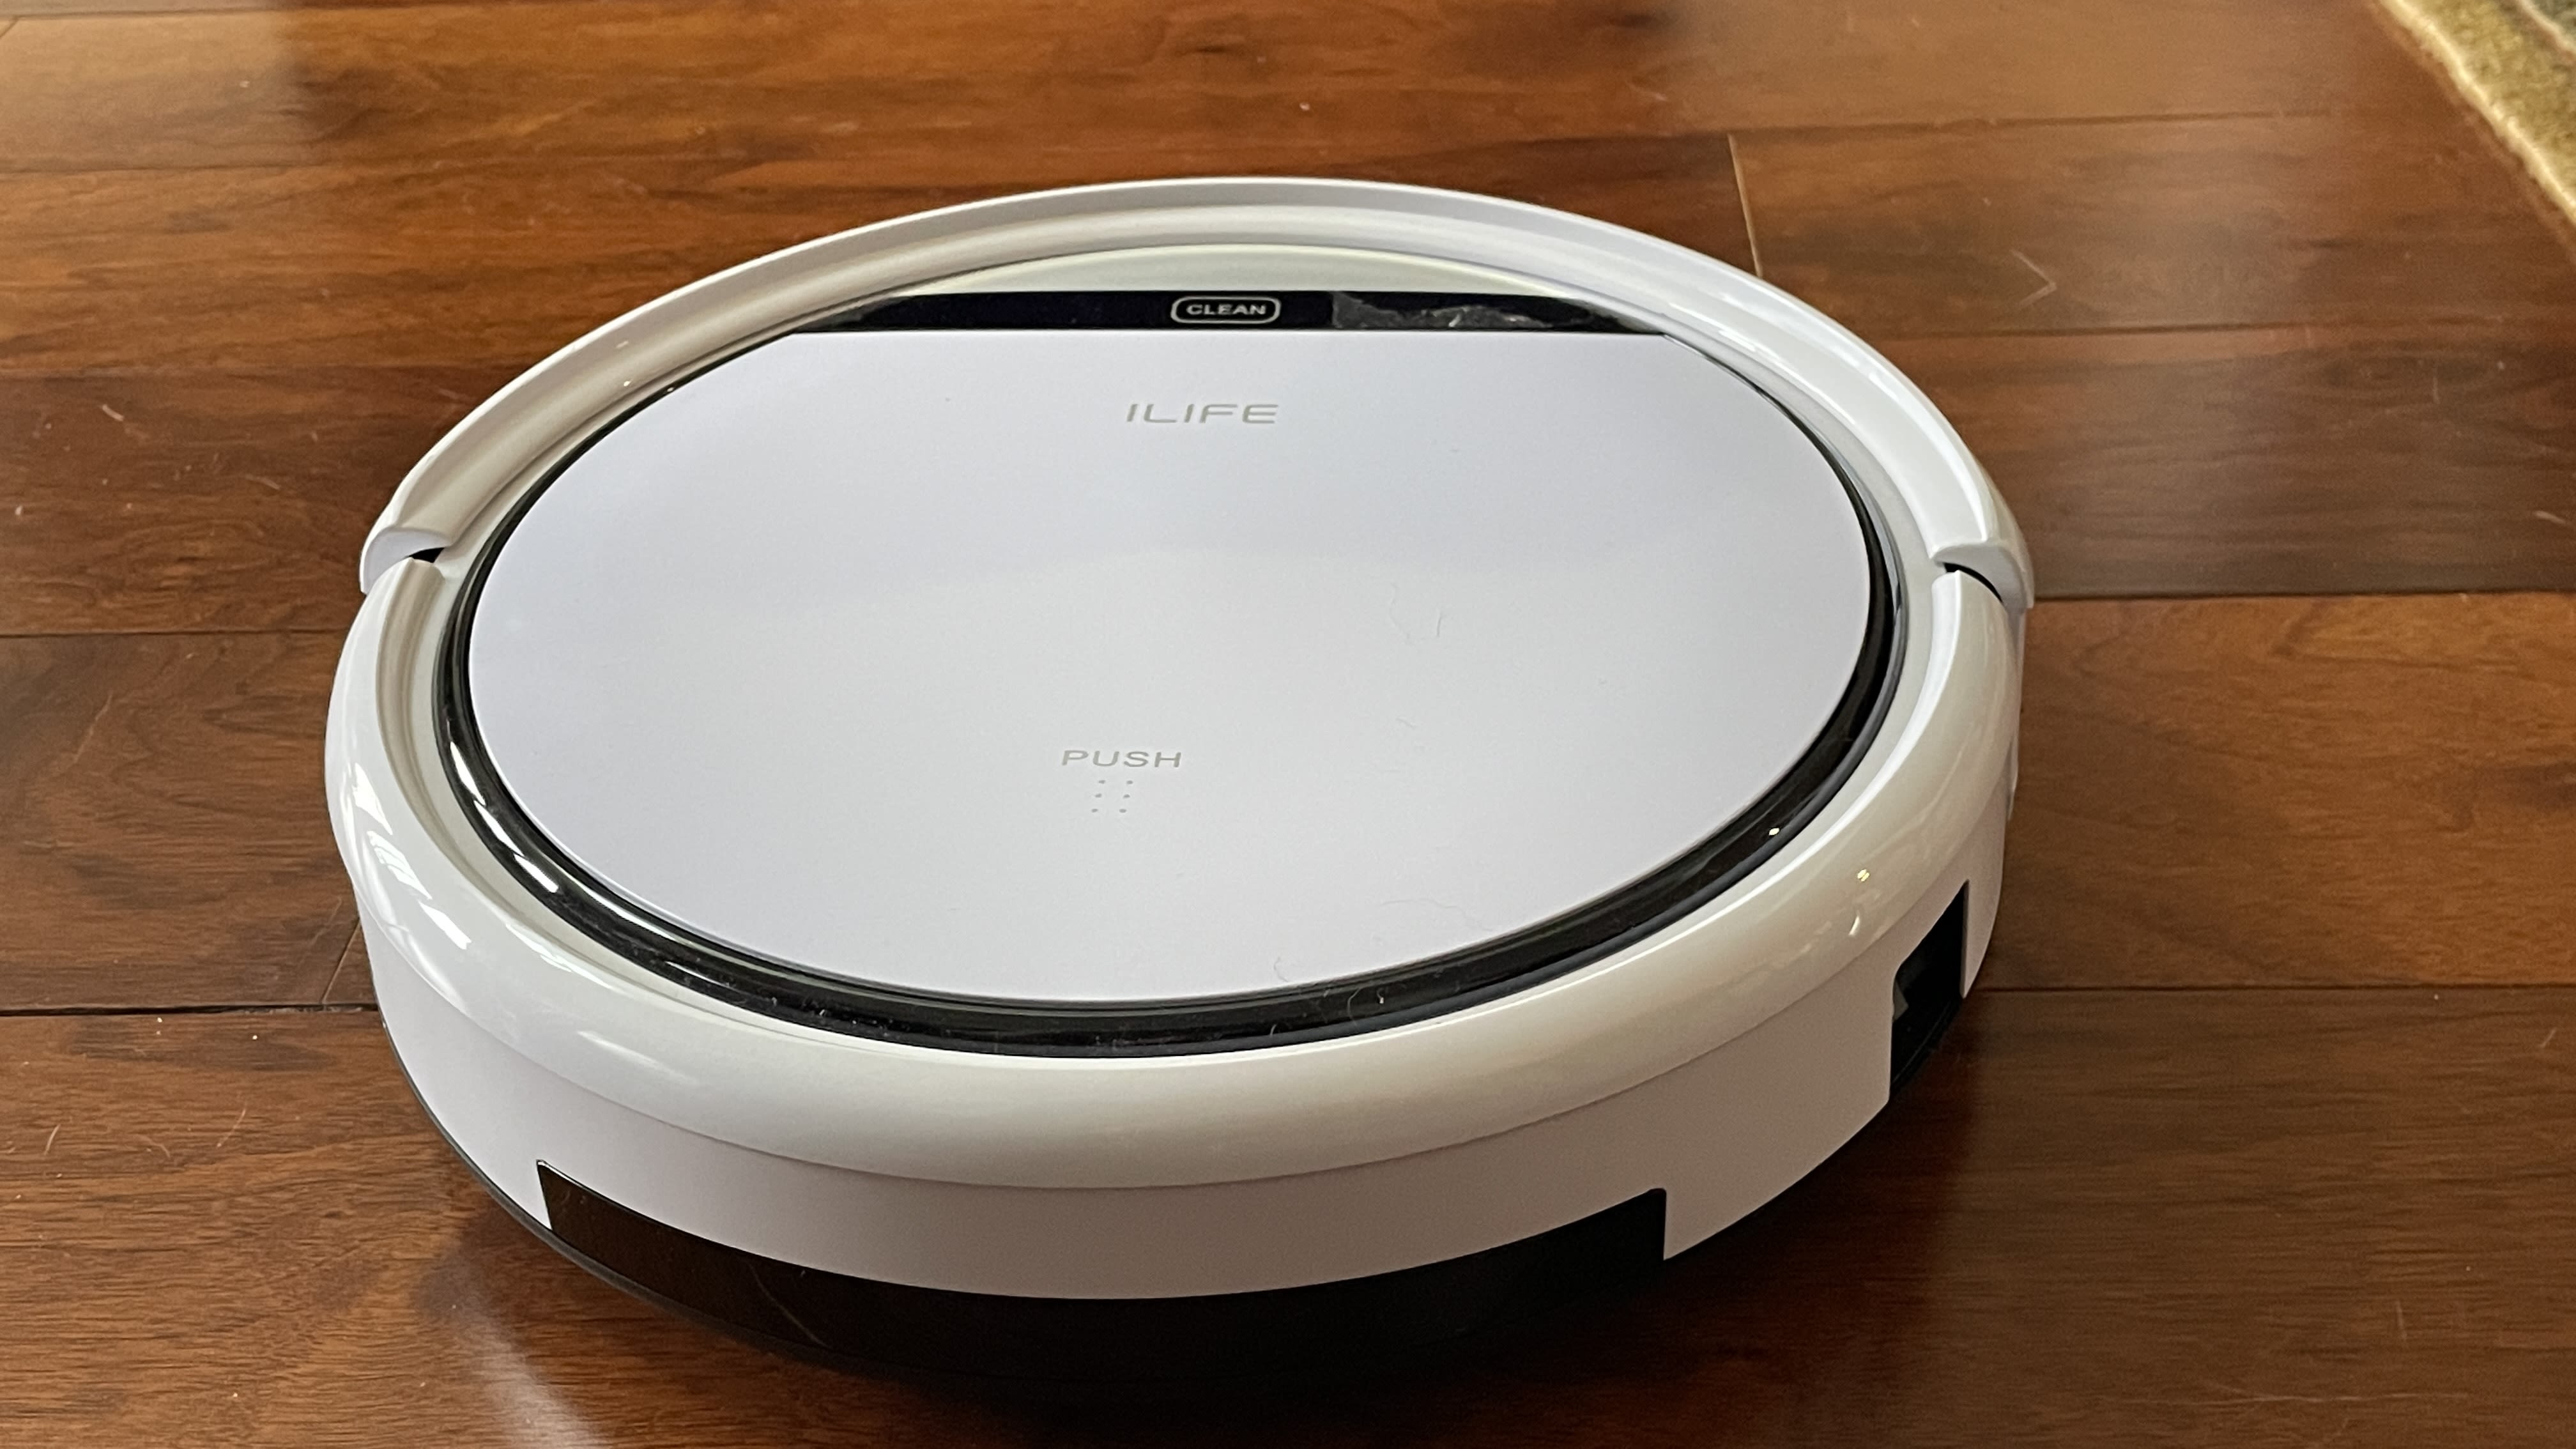 pegs Postkort rense The best robot vacuums of 2023, tested by editors | CNN Underscored